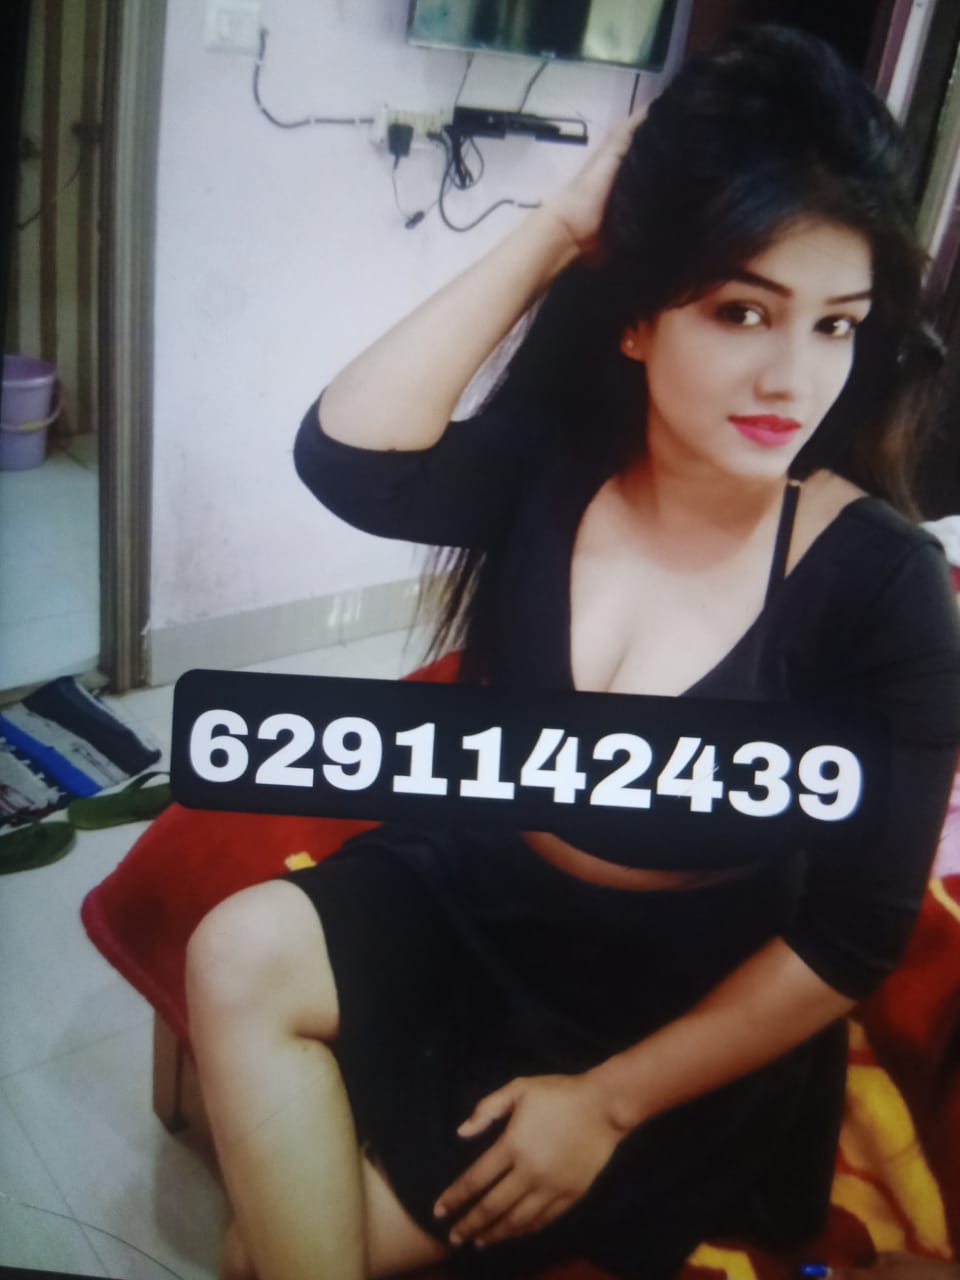 r best service are available here for genuine person only contact m